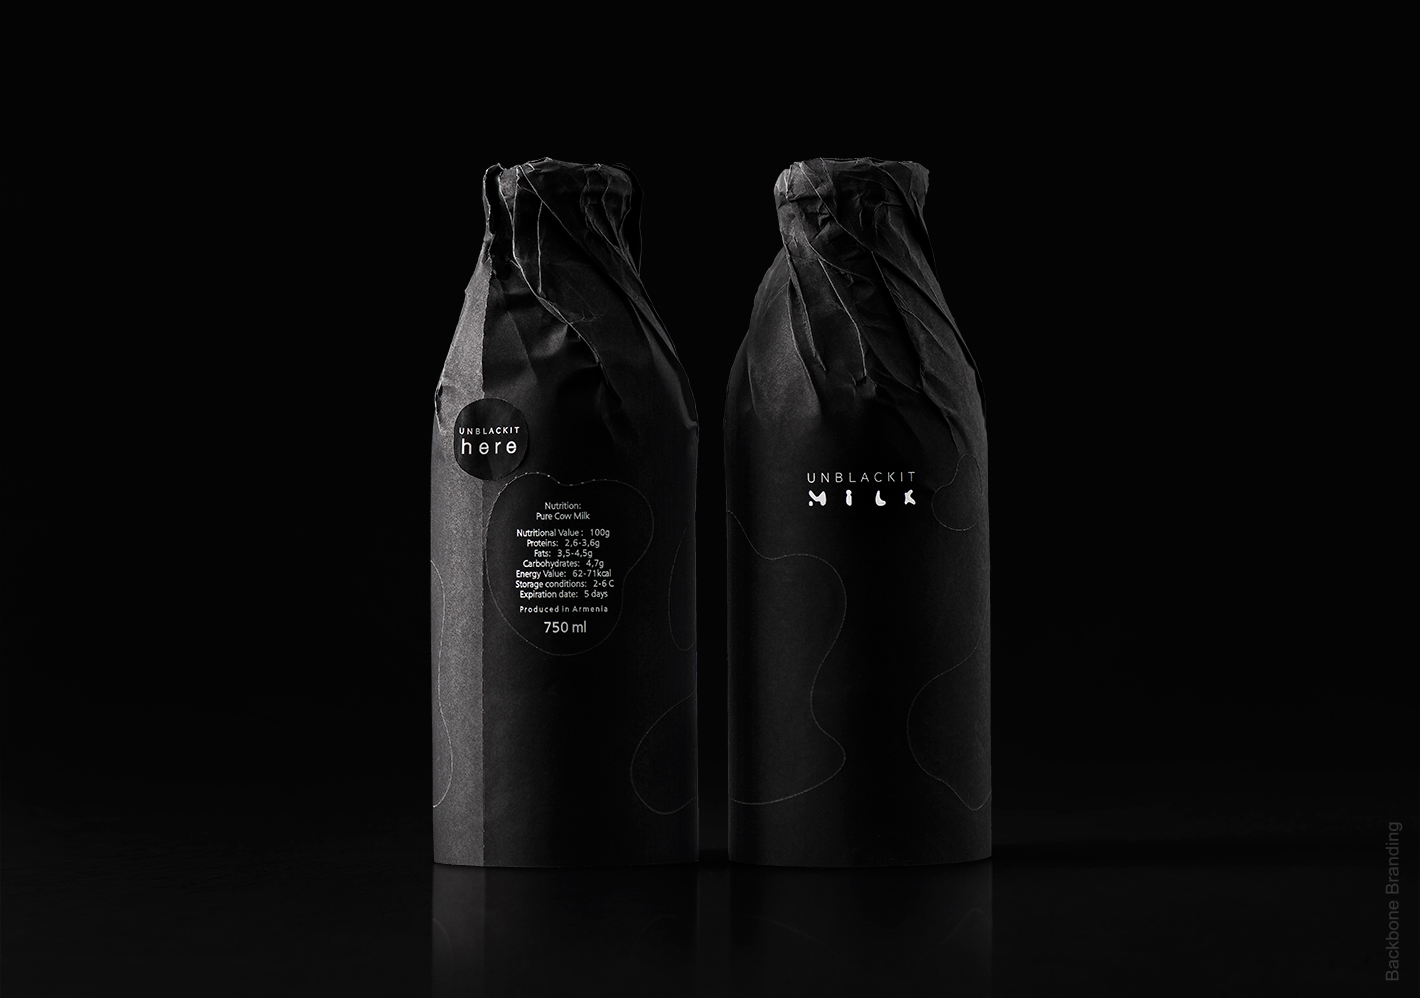 Unblackit: the Mystery of the Black Milk - World Brand Design Society